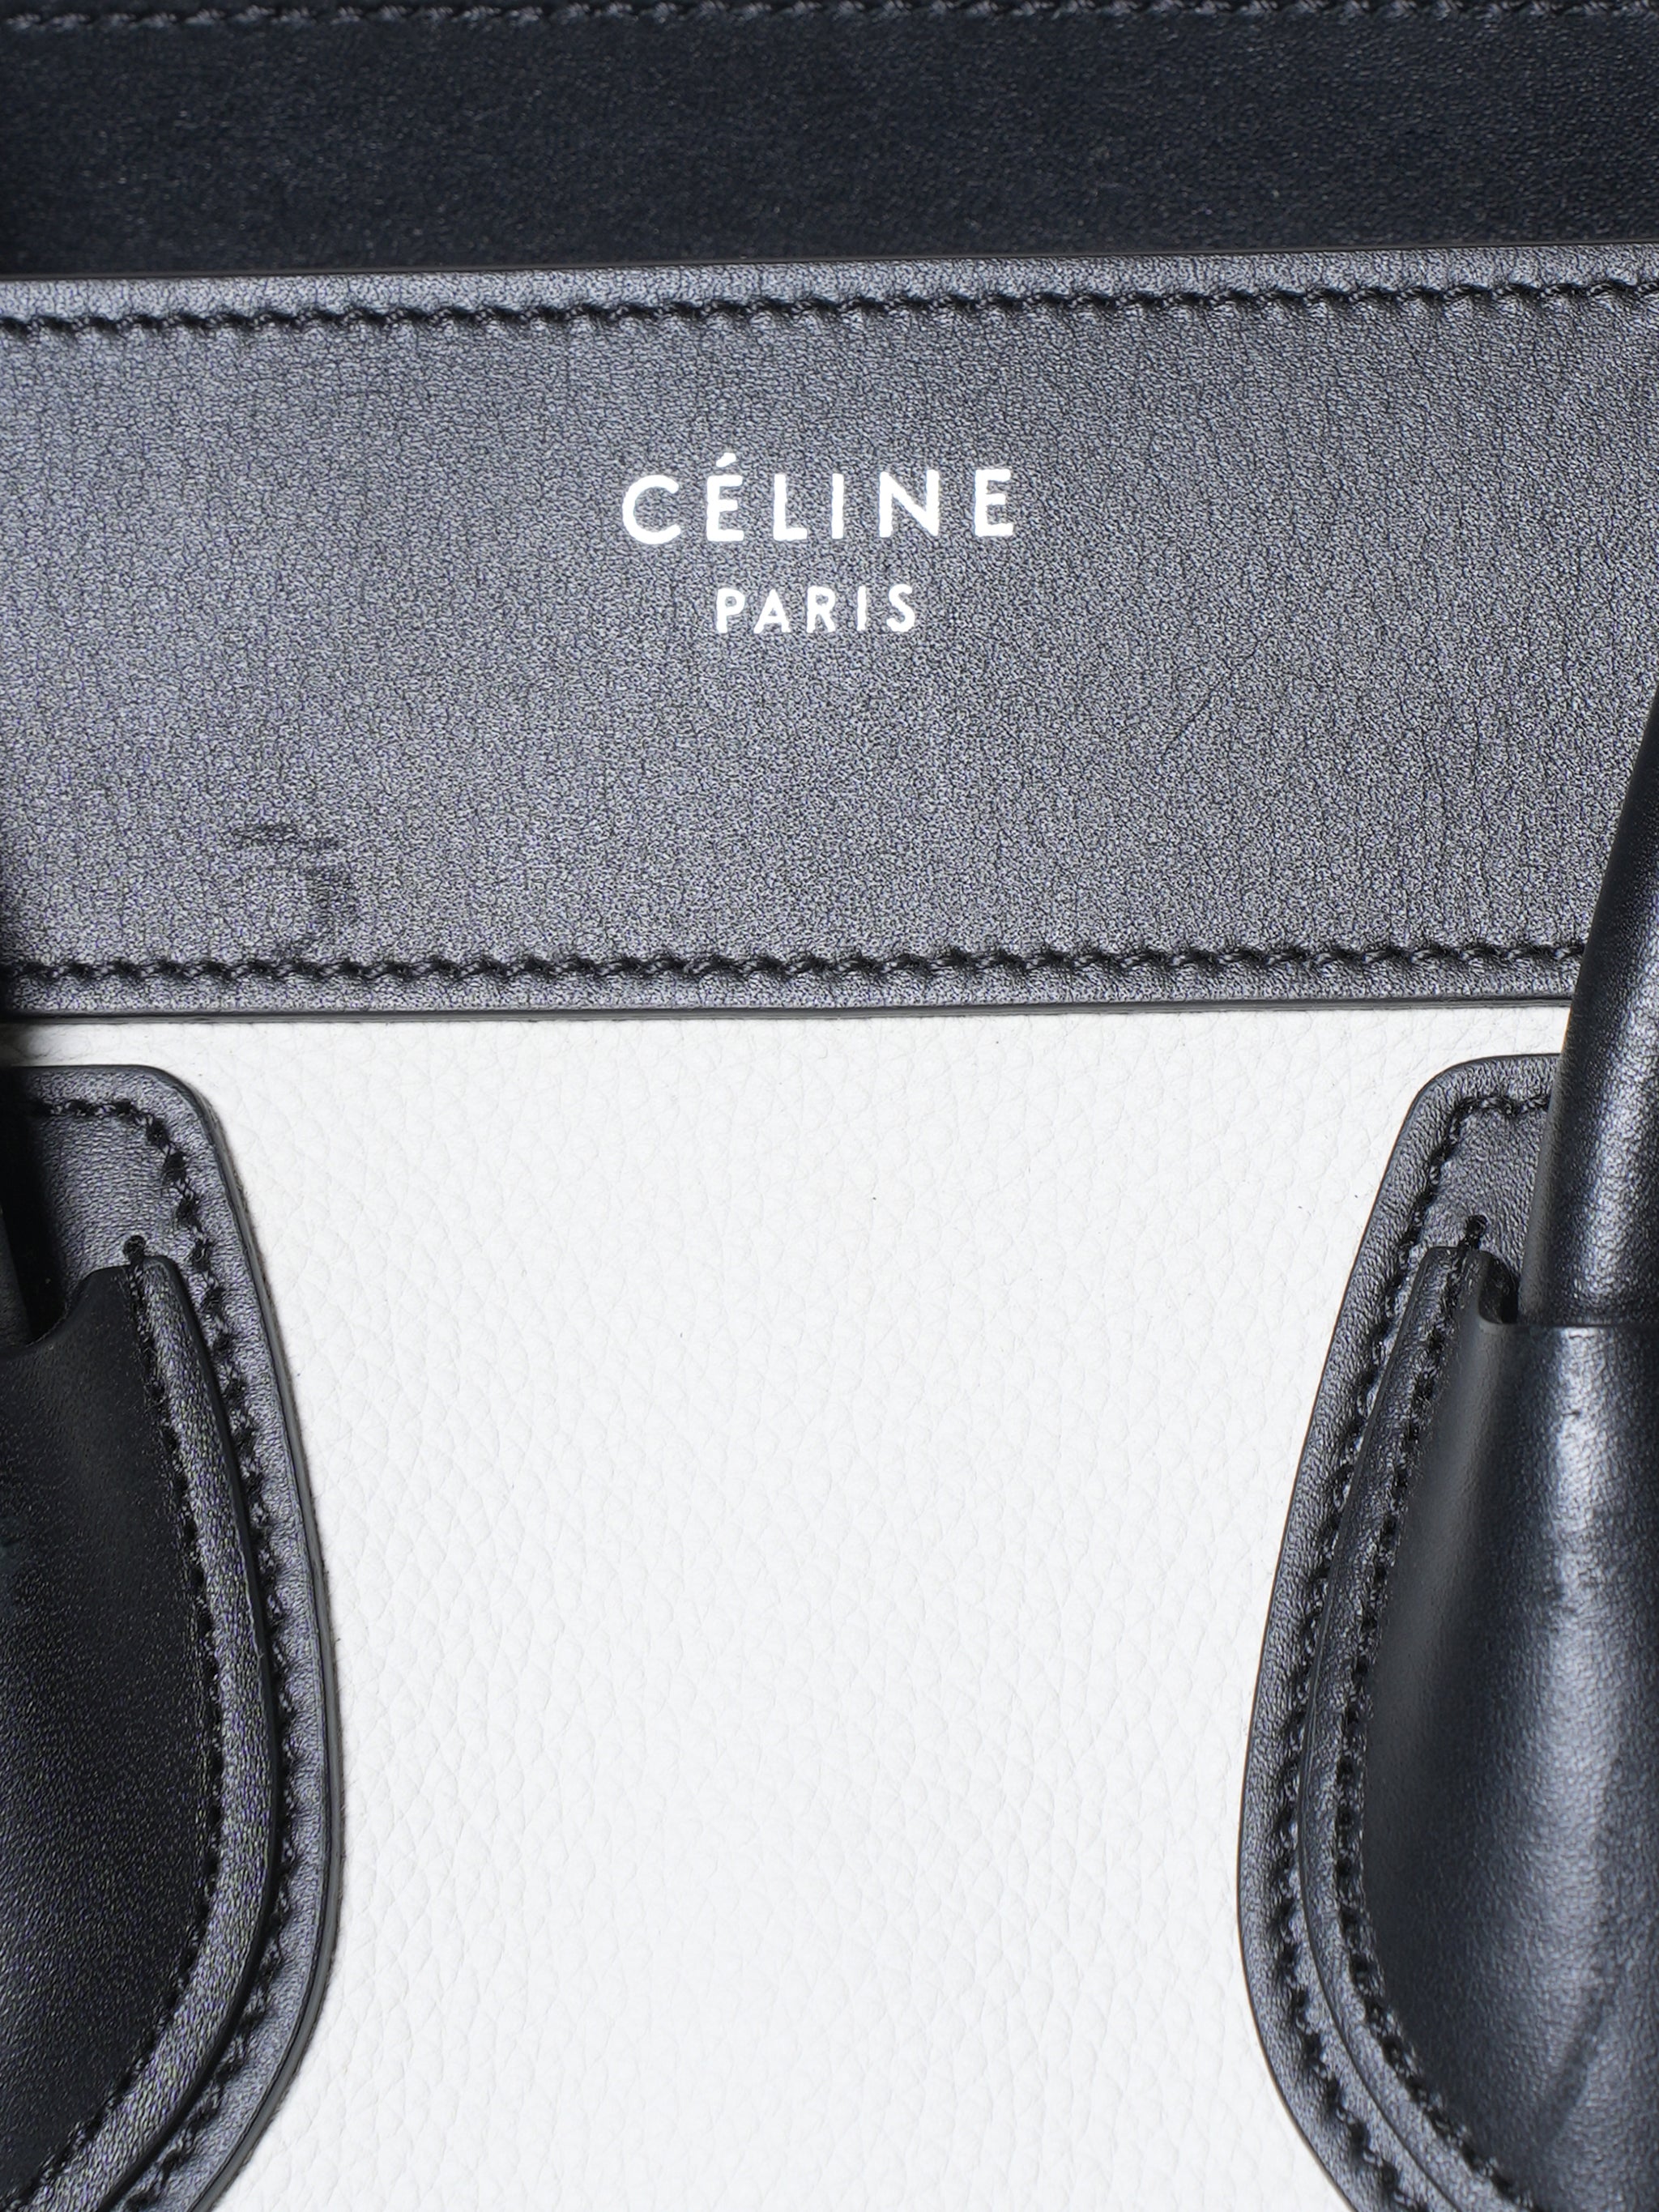 7 Signs of a Fake Celine Bag to Know | LoveToKnow